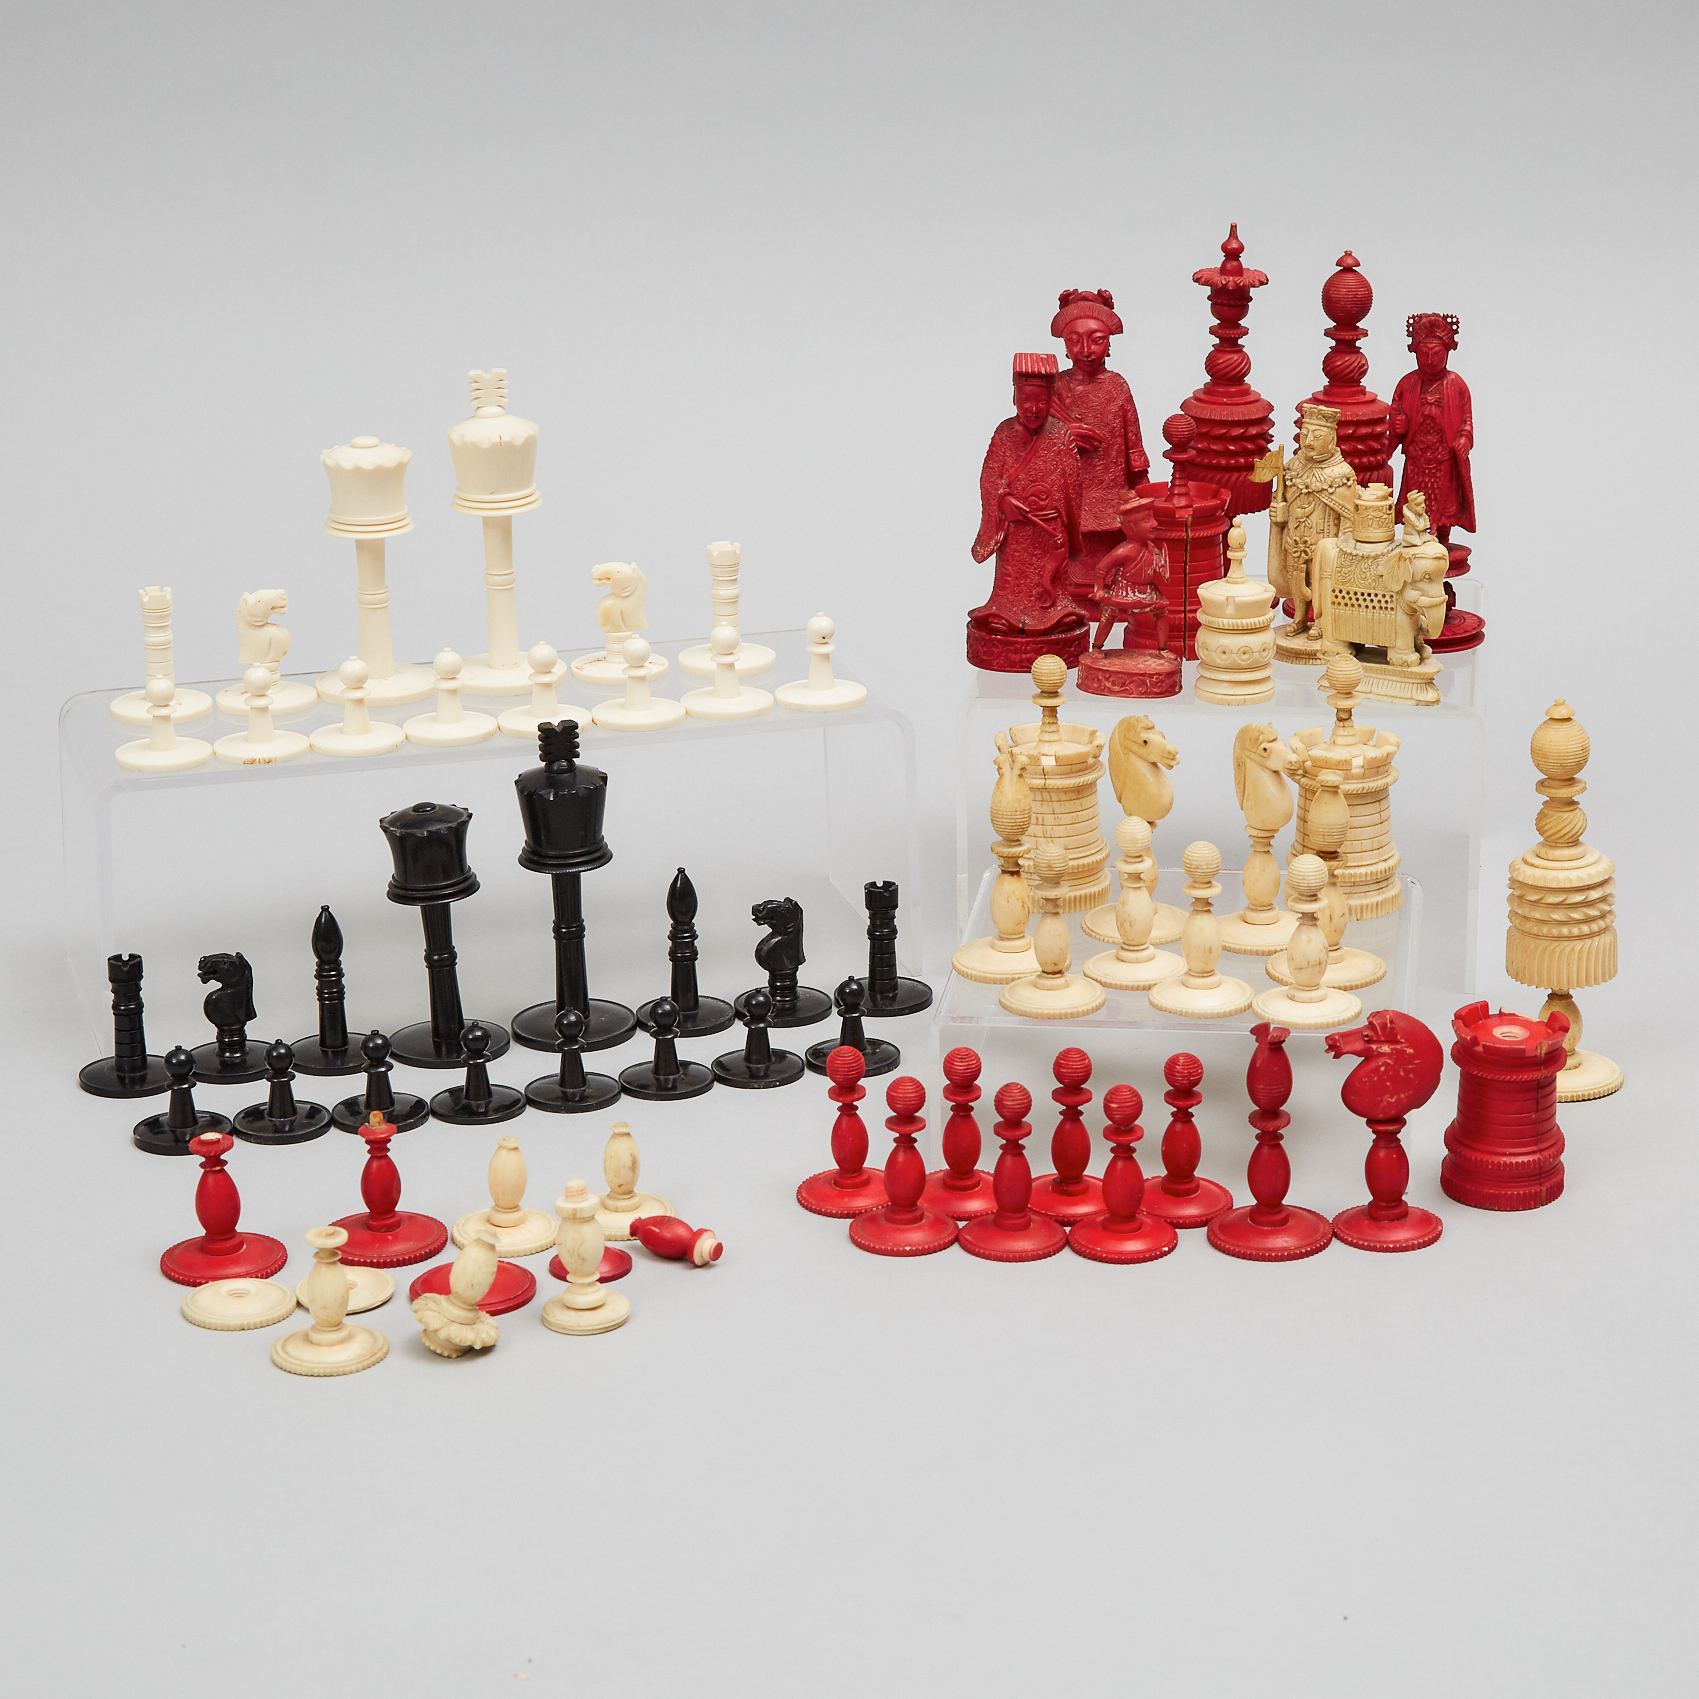 MIscellaneous Group of Mostly Indian Ivory Incomplete Chess Sets, 19th century